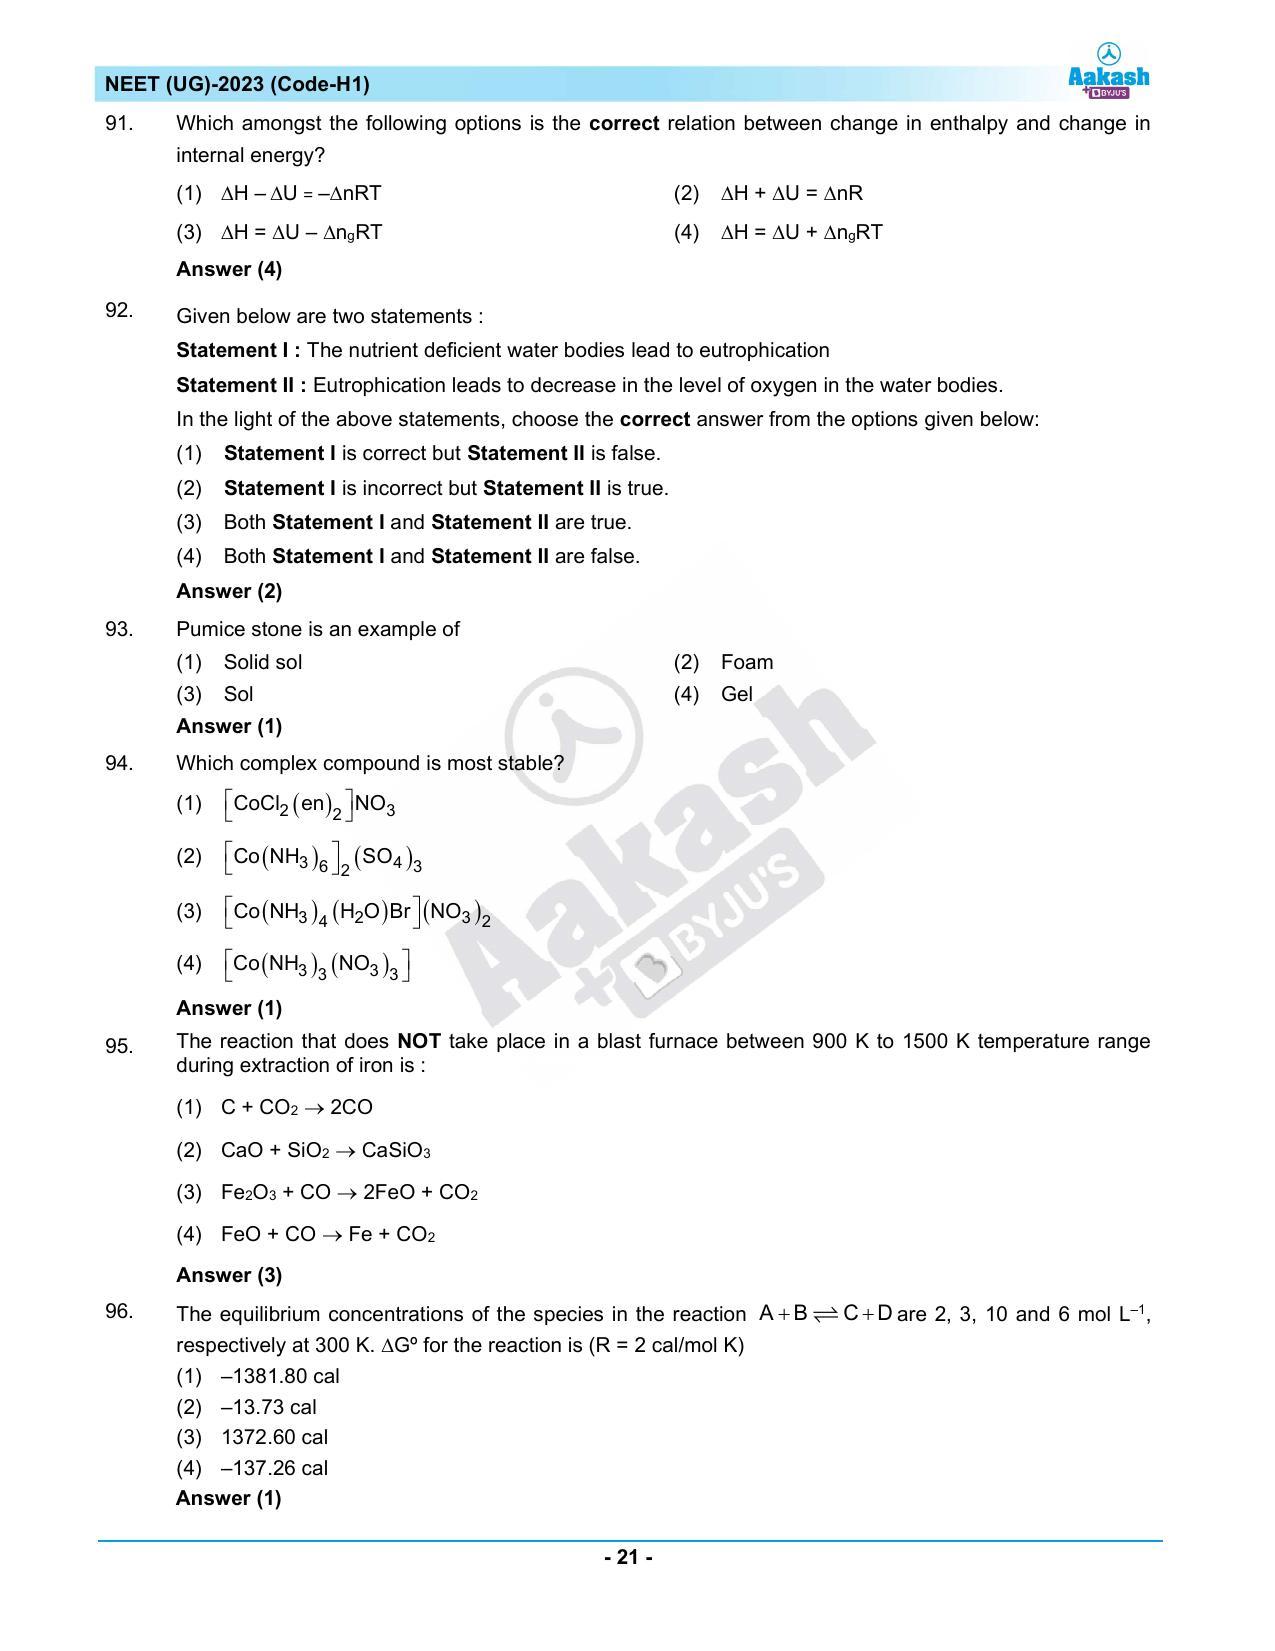 NEET 2023 Question Paper H1 - Page 21